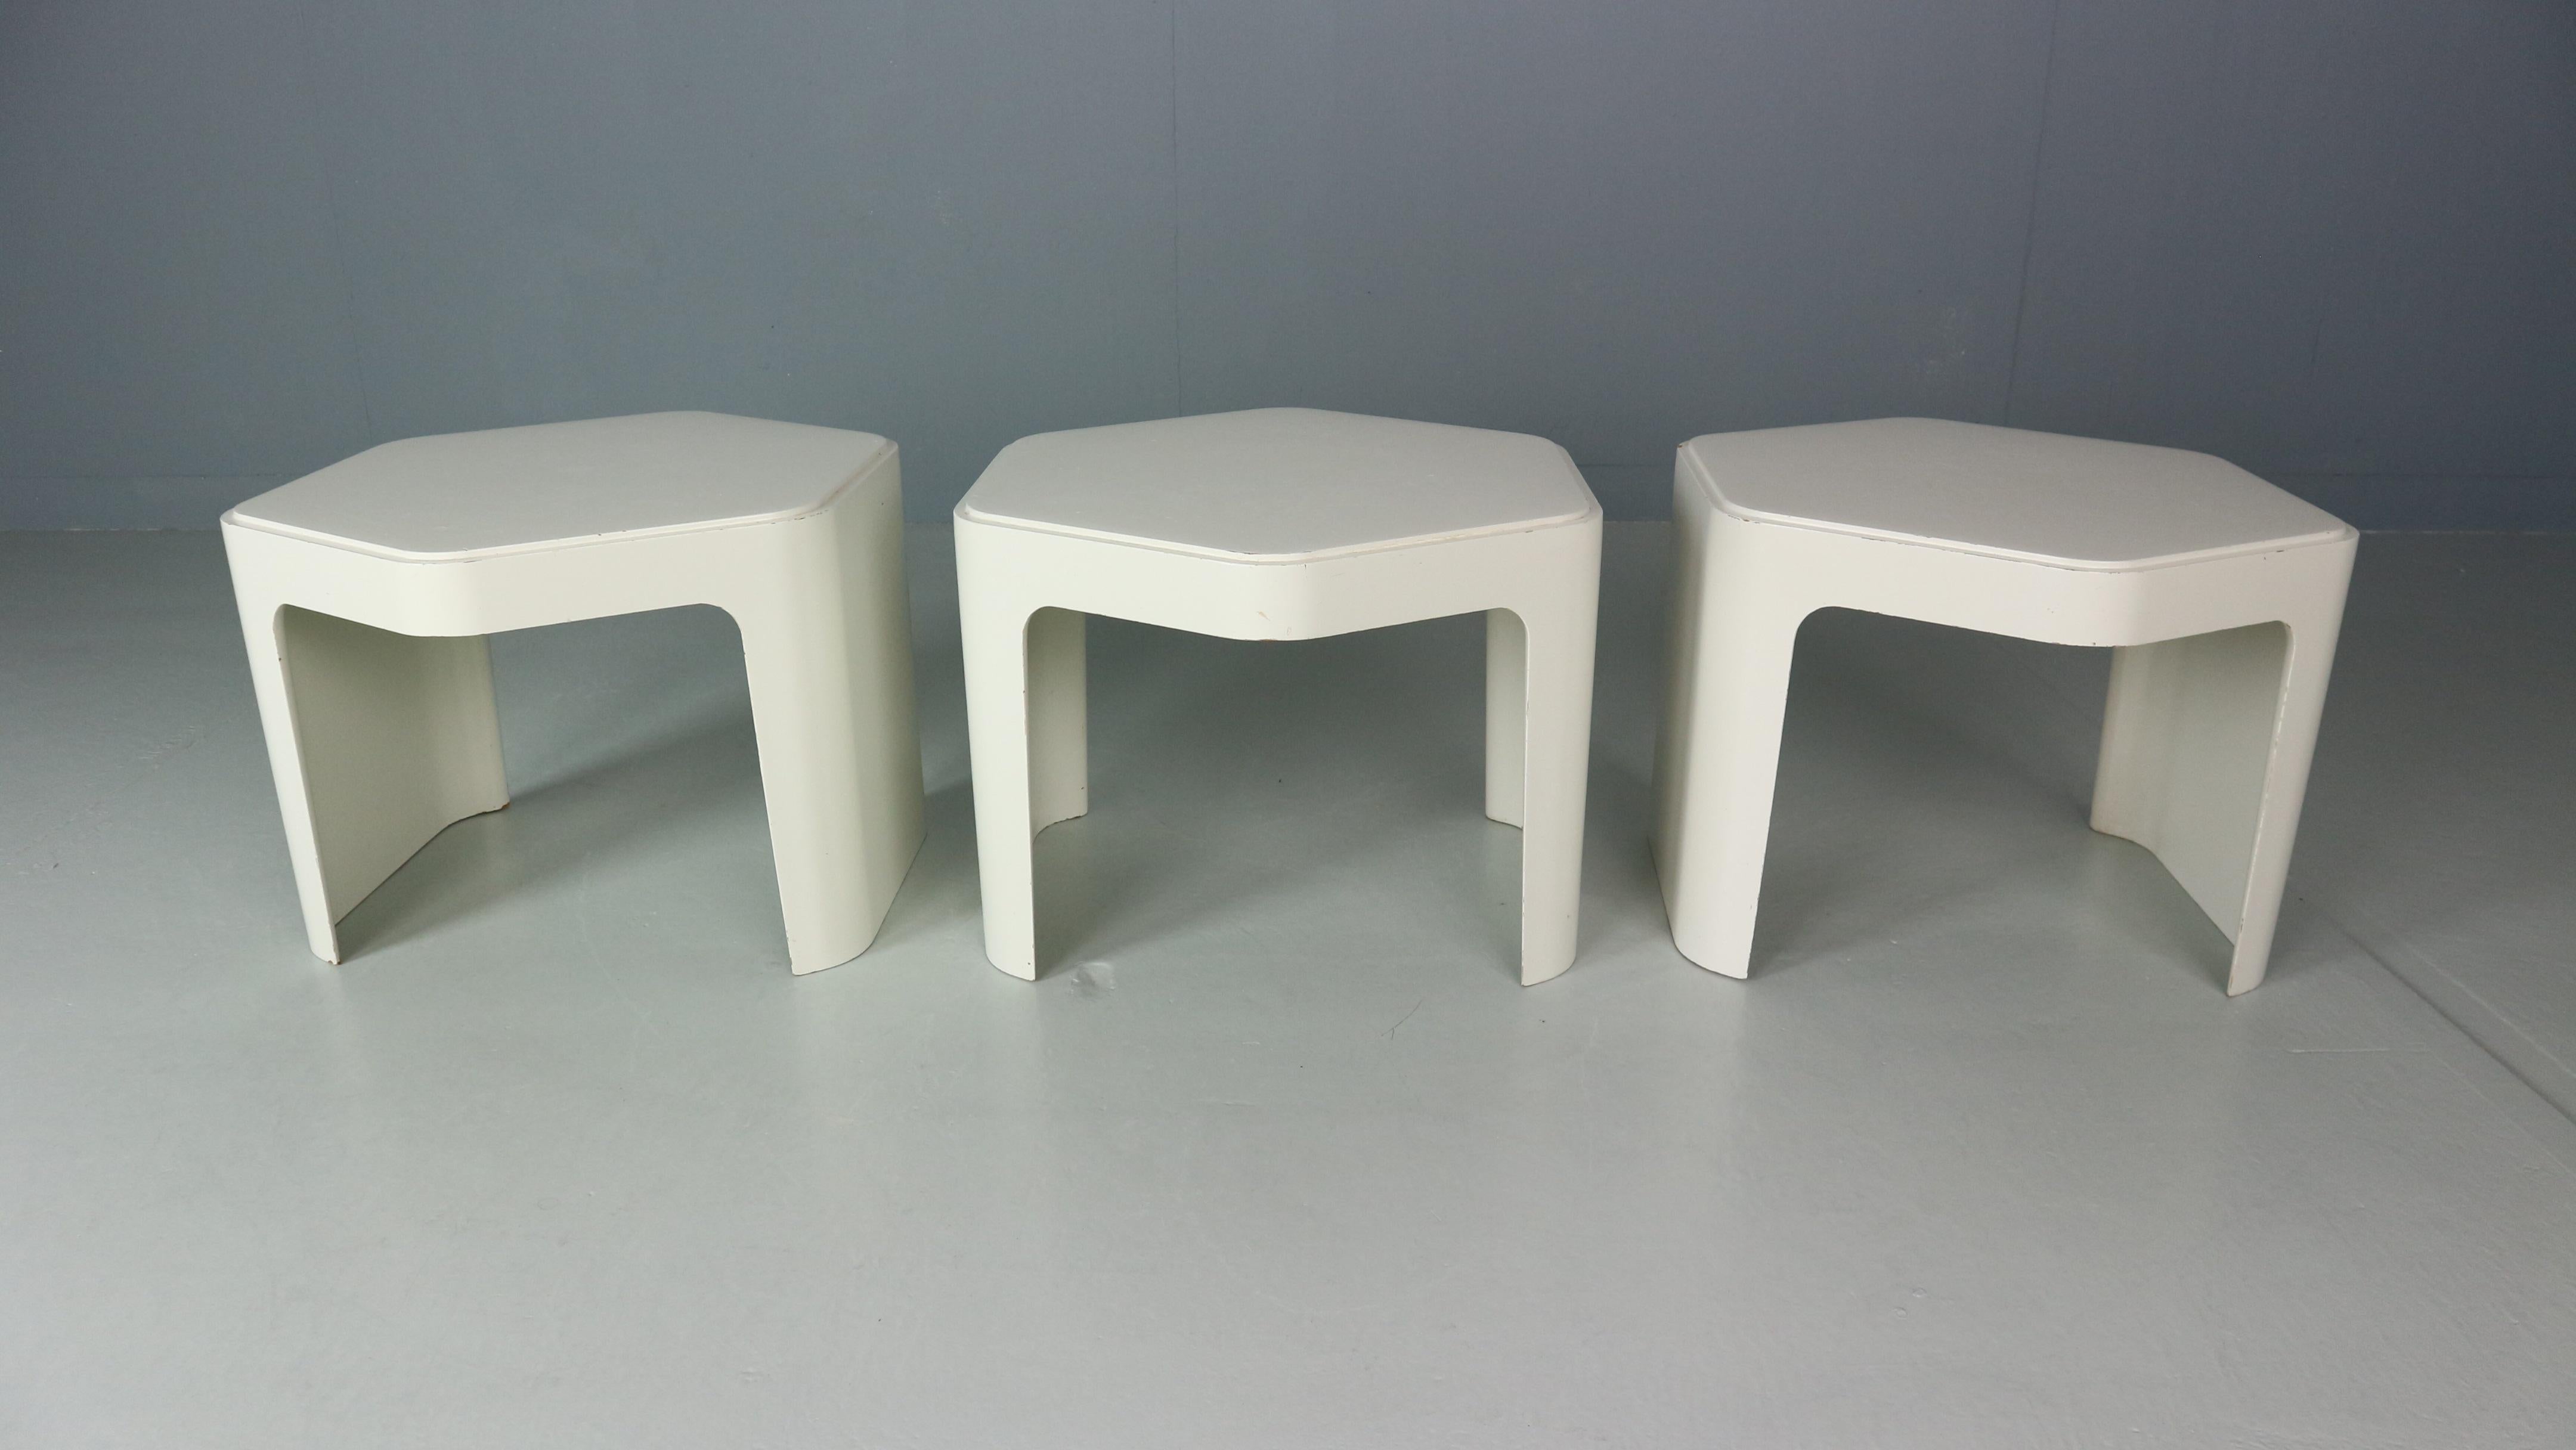 3x Hexagonal side tables by Peter Ghyzcy for Form + Life Collection, 1970. For Sale 3